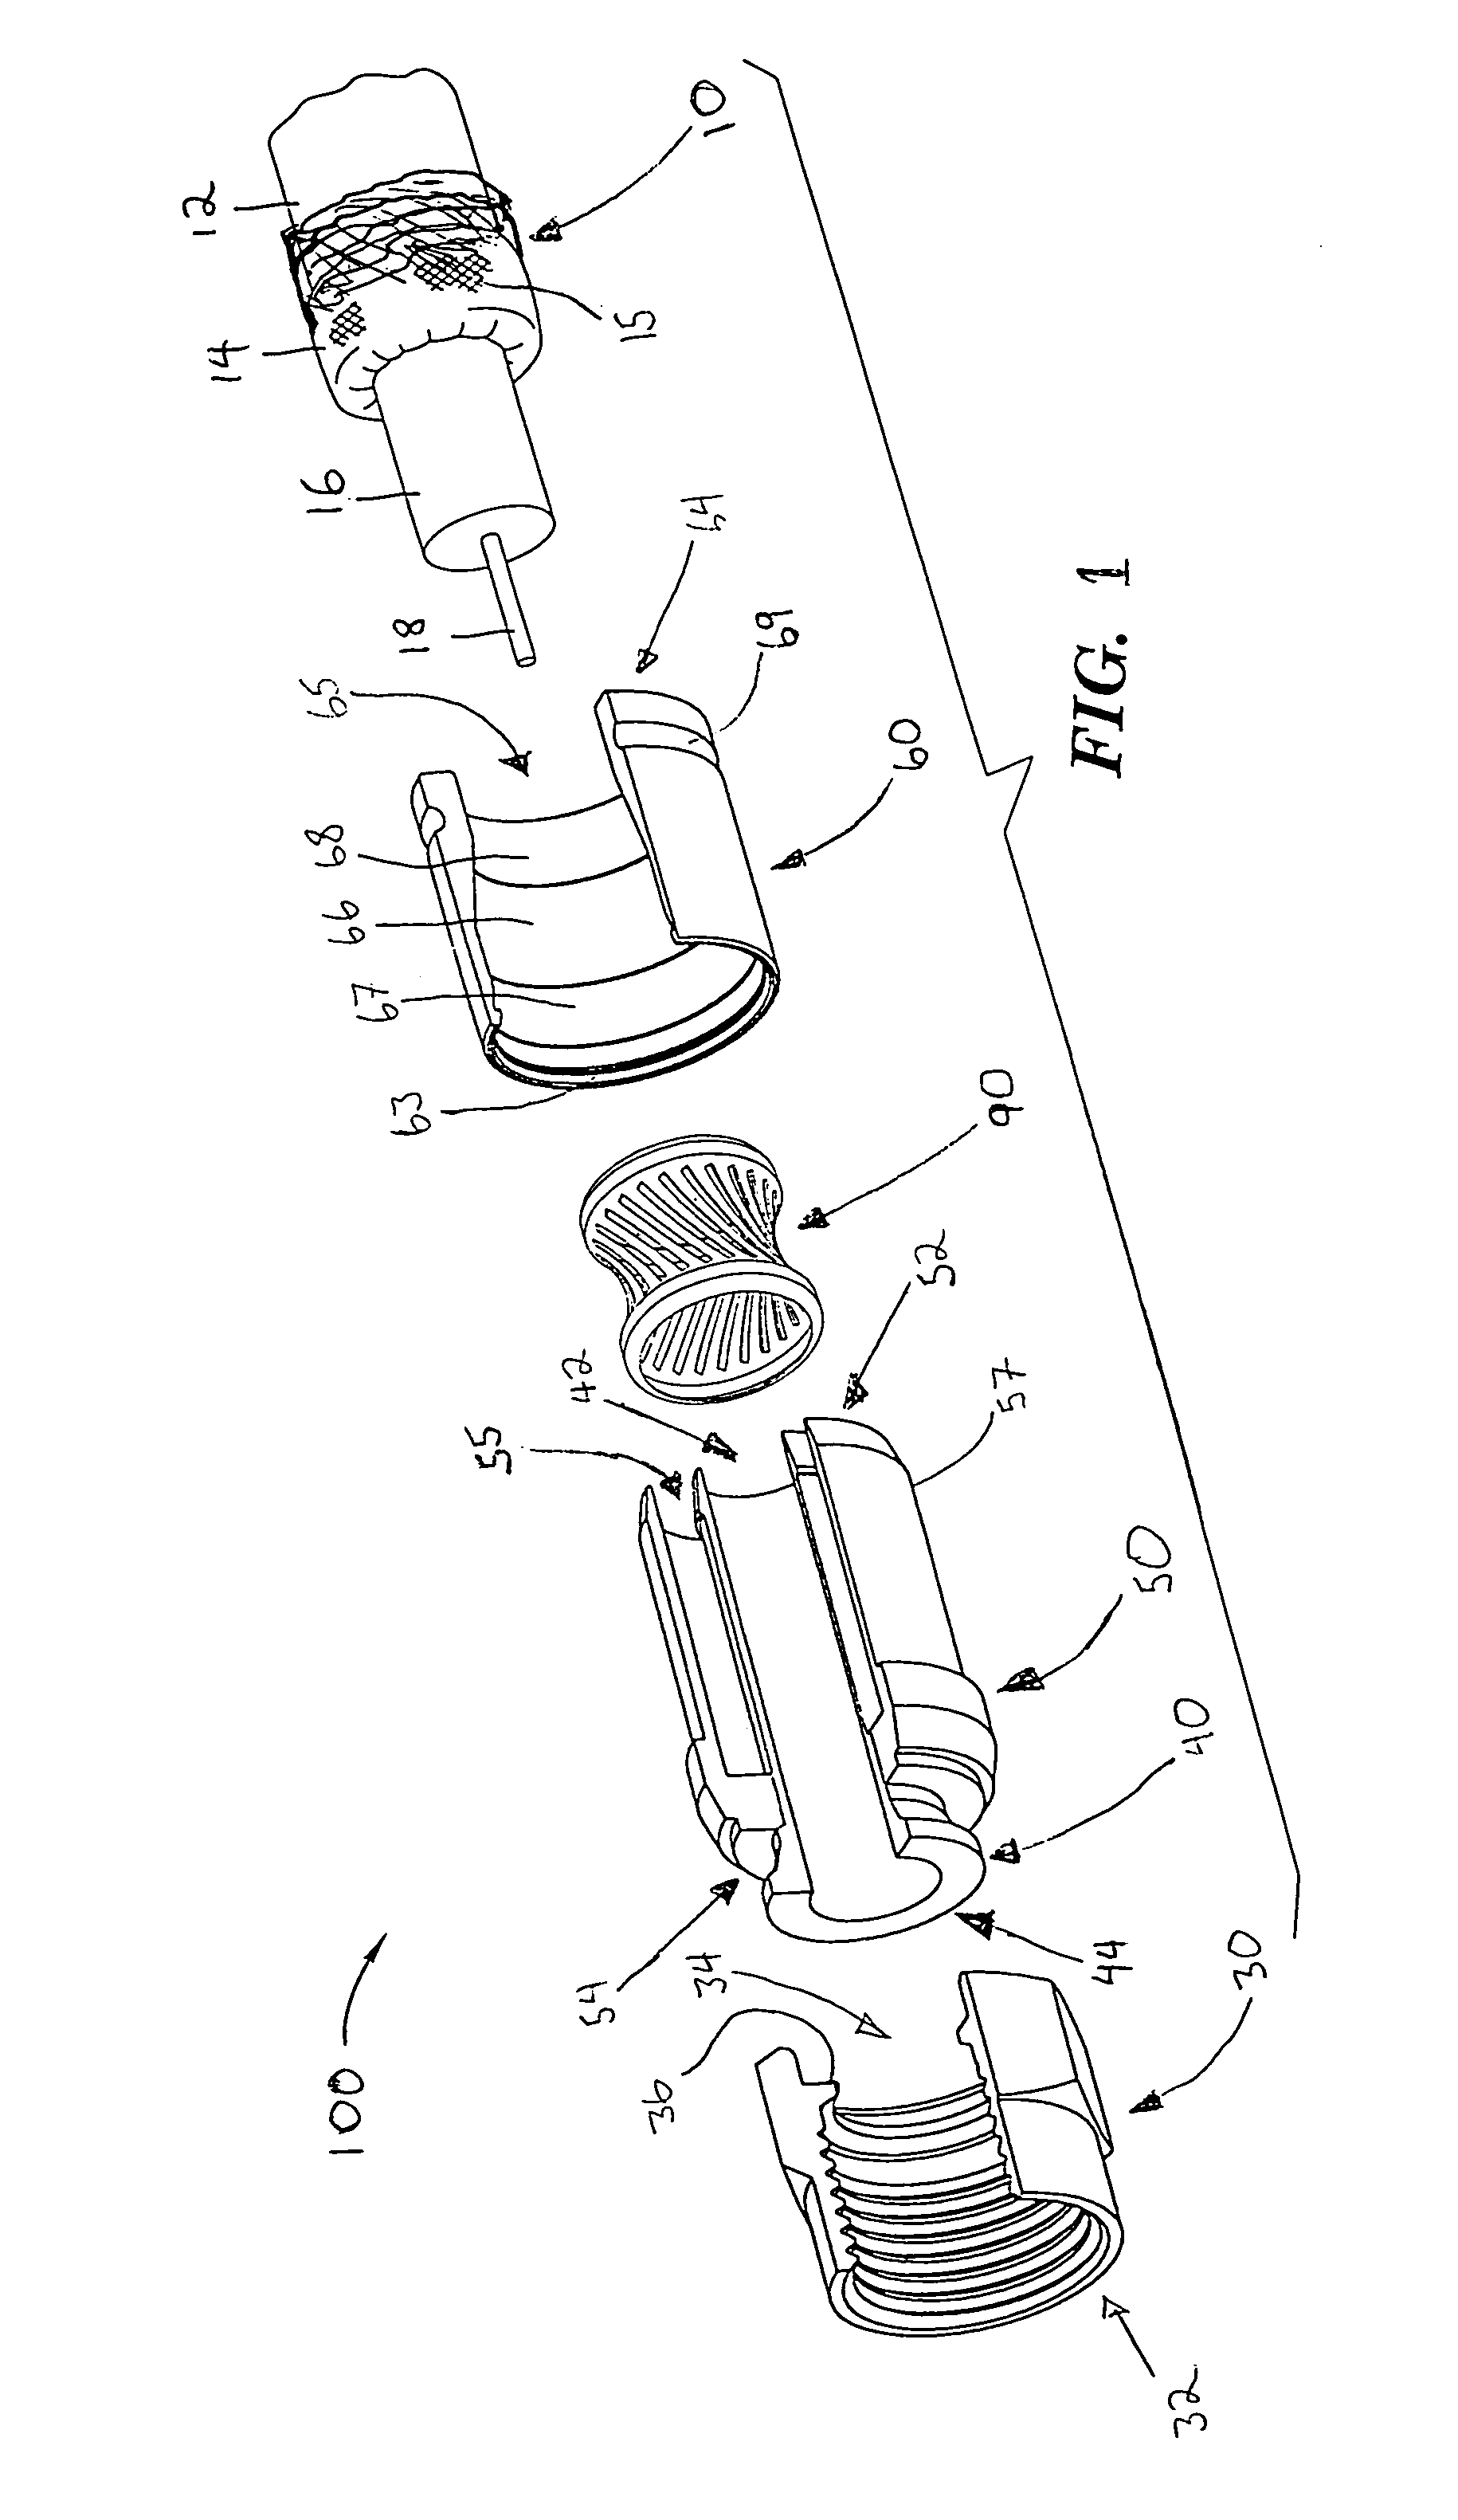 Coaxial cable connector having conductive engagement element and method of use thereof